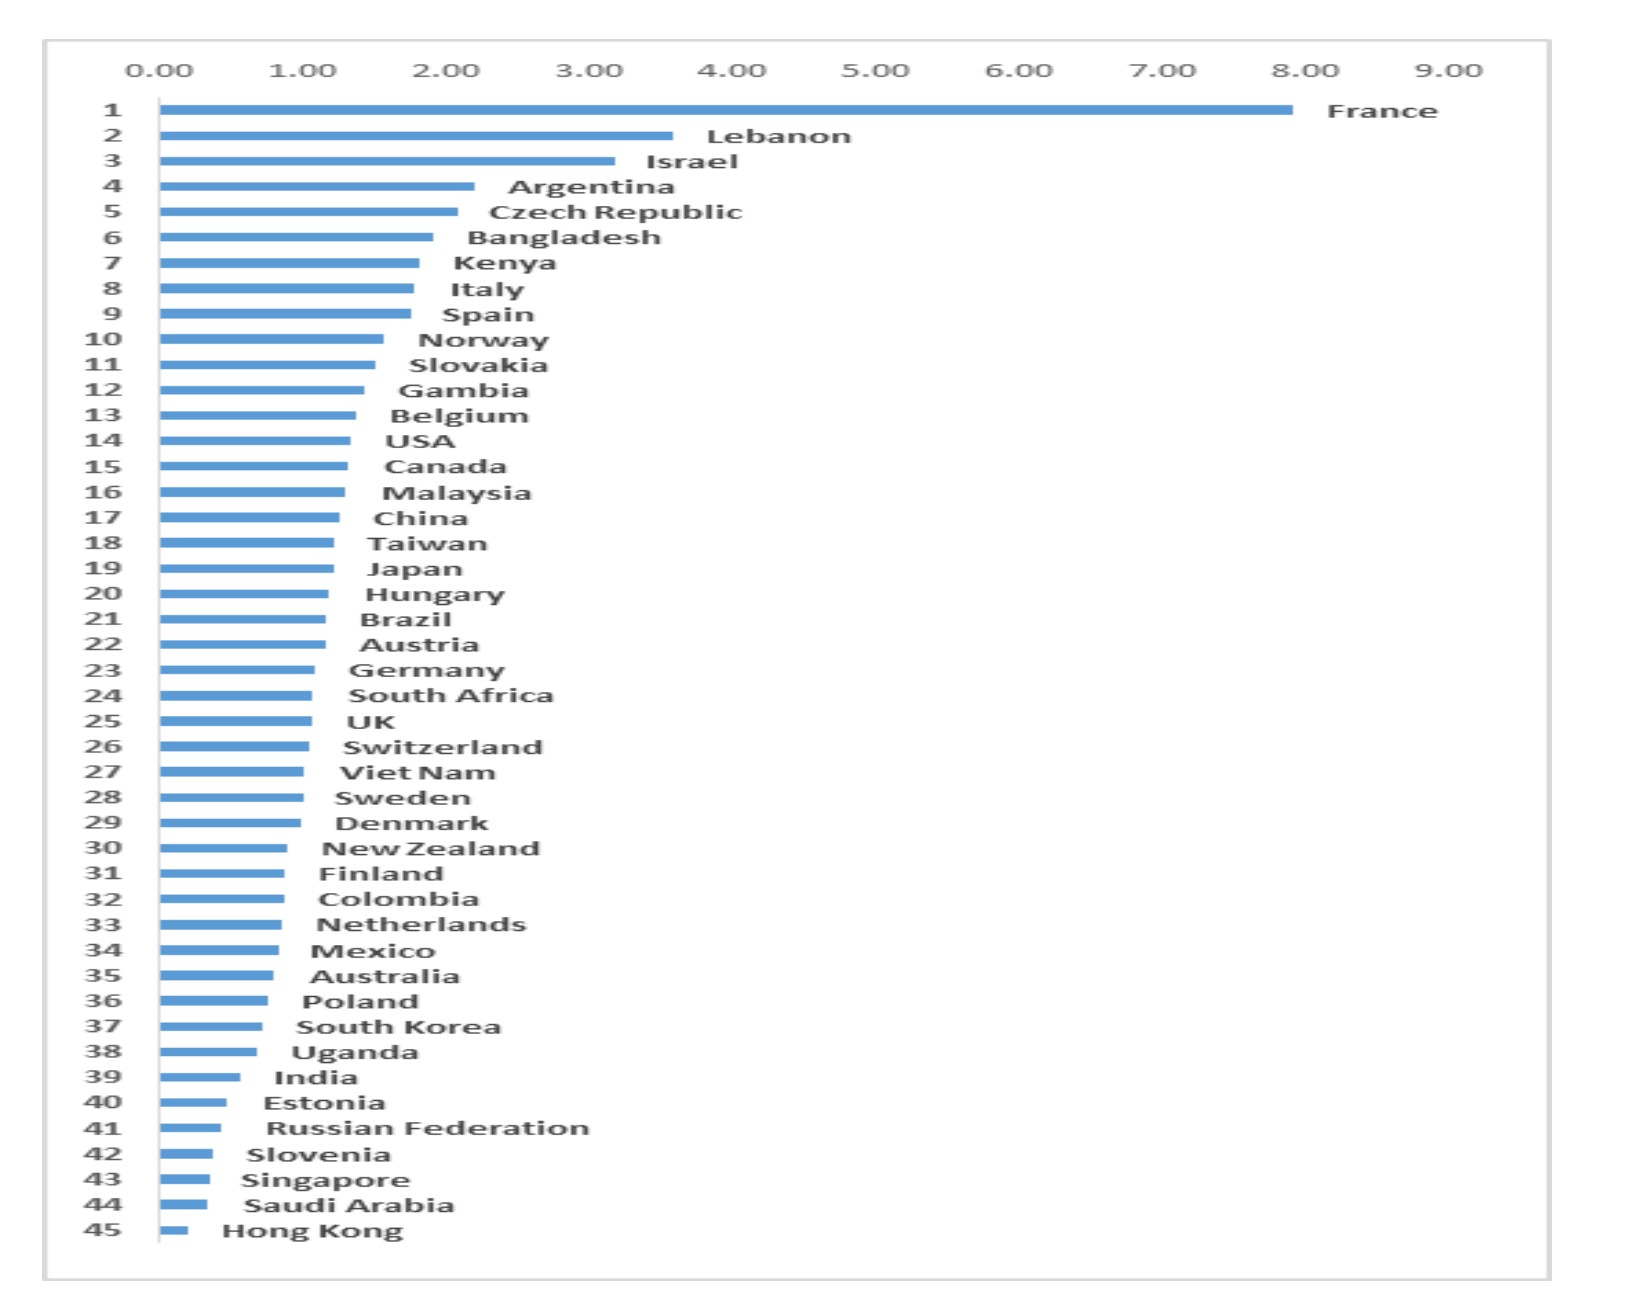 Appendix 5. The countries' relative citation cost-effectiveness means in 2013